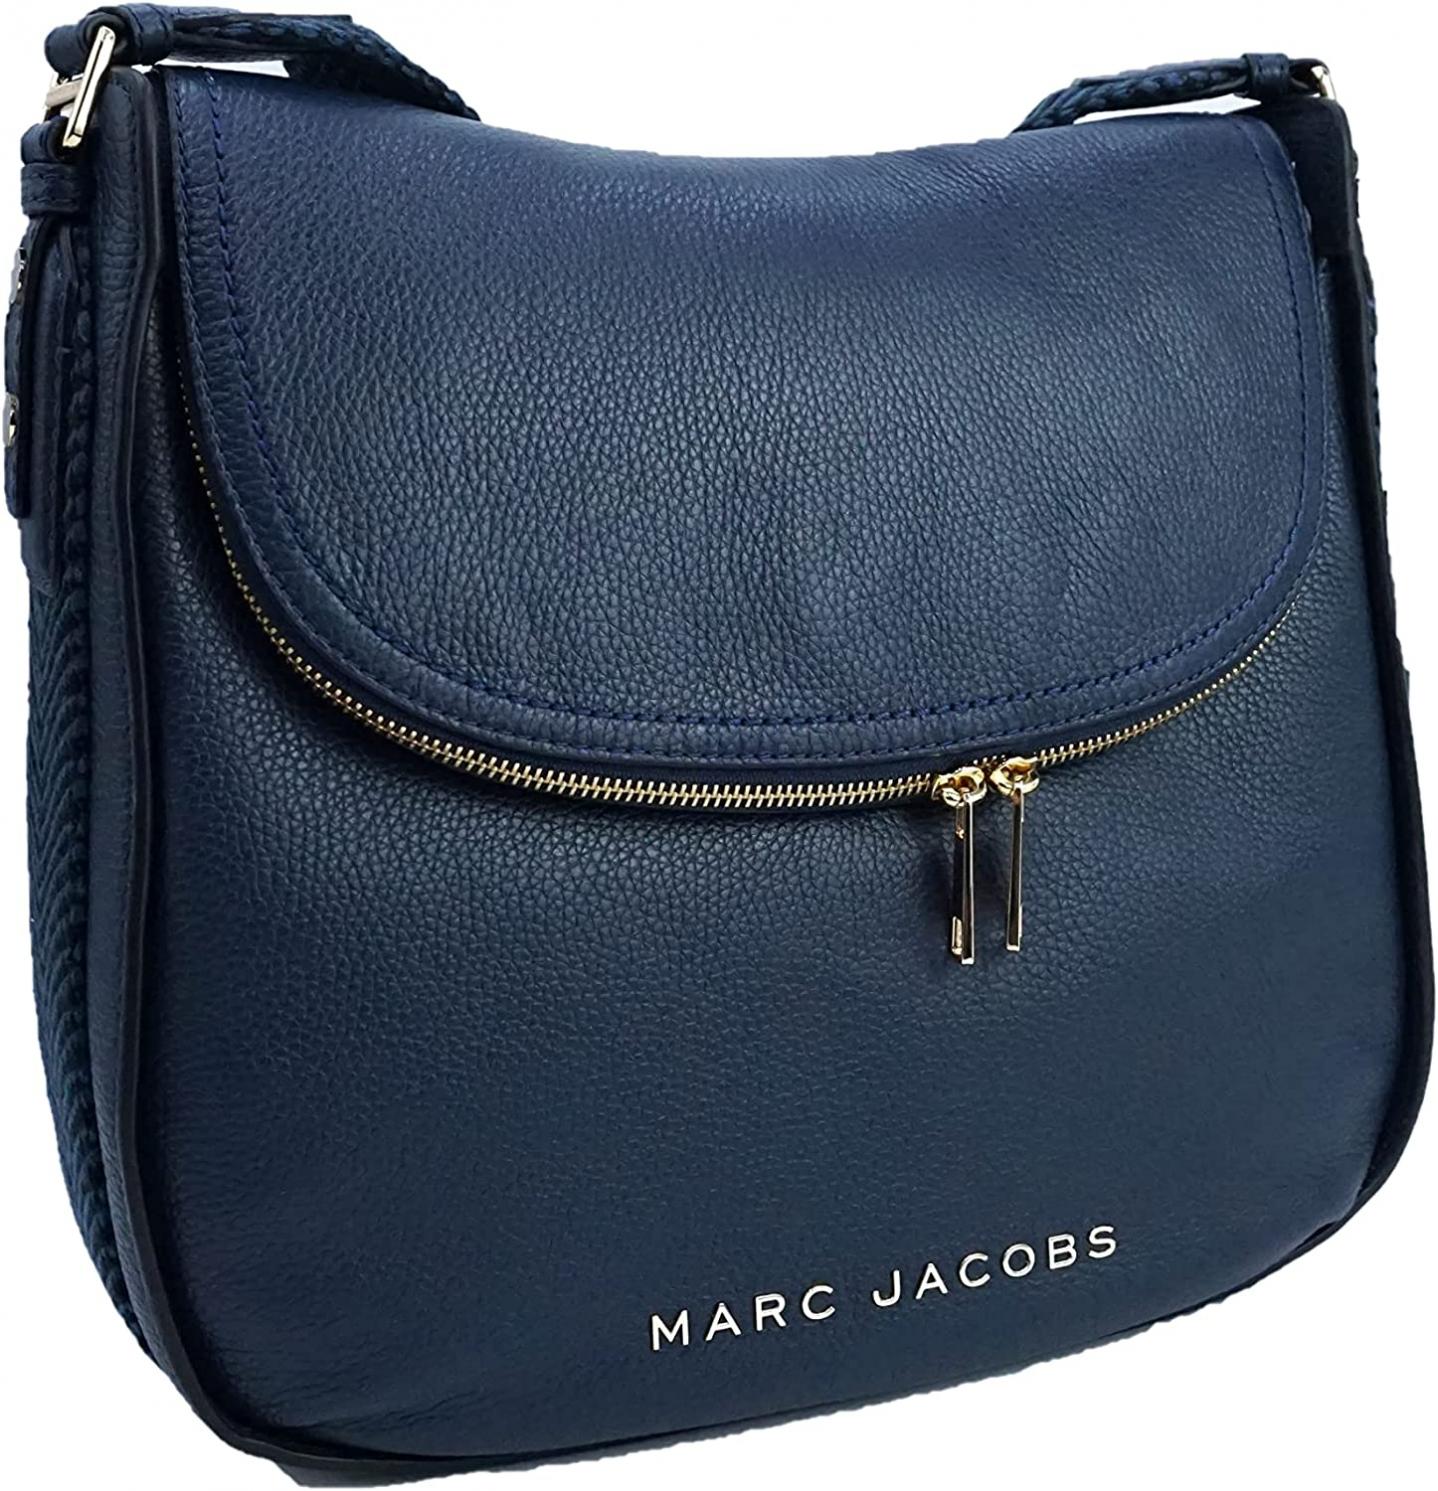 Marc Jacobs H211L01RE21-426 Blue Sea With Gold Hardware Women's Leather Shoulder Hobo Bag